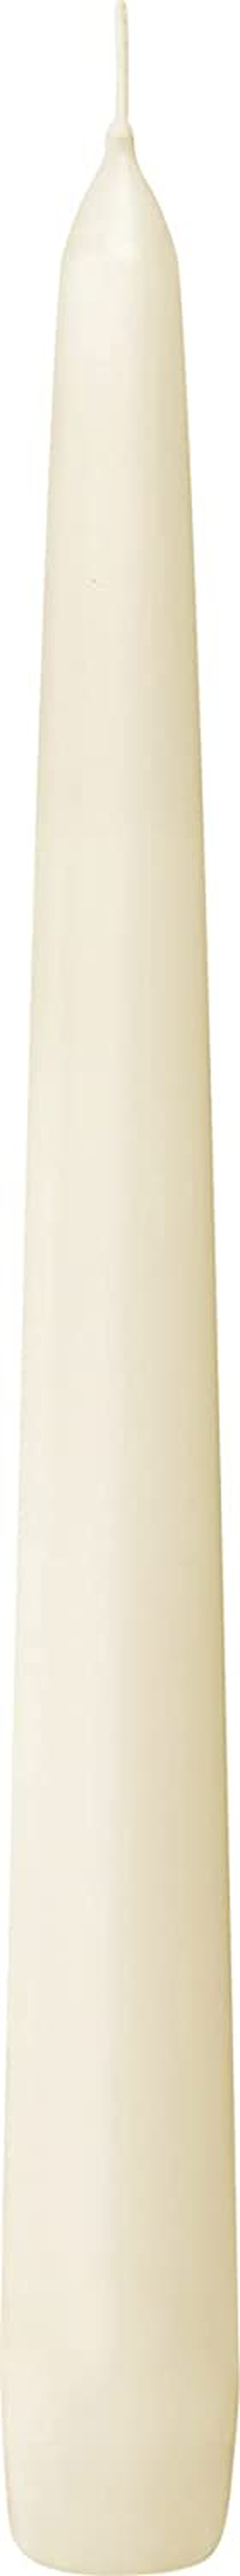 BOLSIUS Long Household Ivory Taper Candles - 10-inch Unscented Premium Quality Wax - 7 Hour Long Burning Dripless Candles Bulk Pack of 100 for Home Decor, Wedding, Parties and Special Occasions Home & Garden > Decor > Home Fragrances > Candles BOLSIUS   